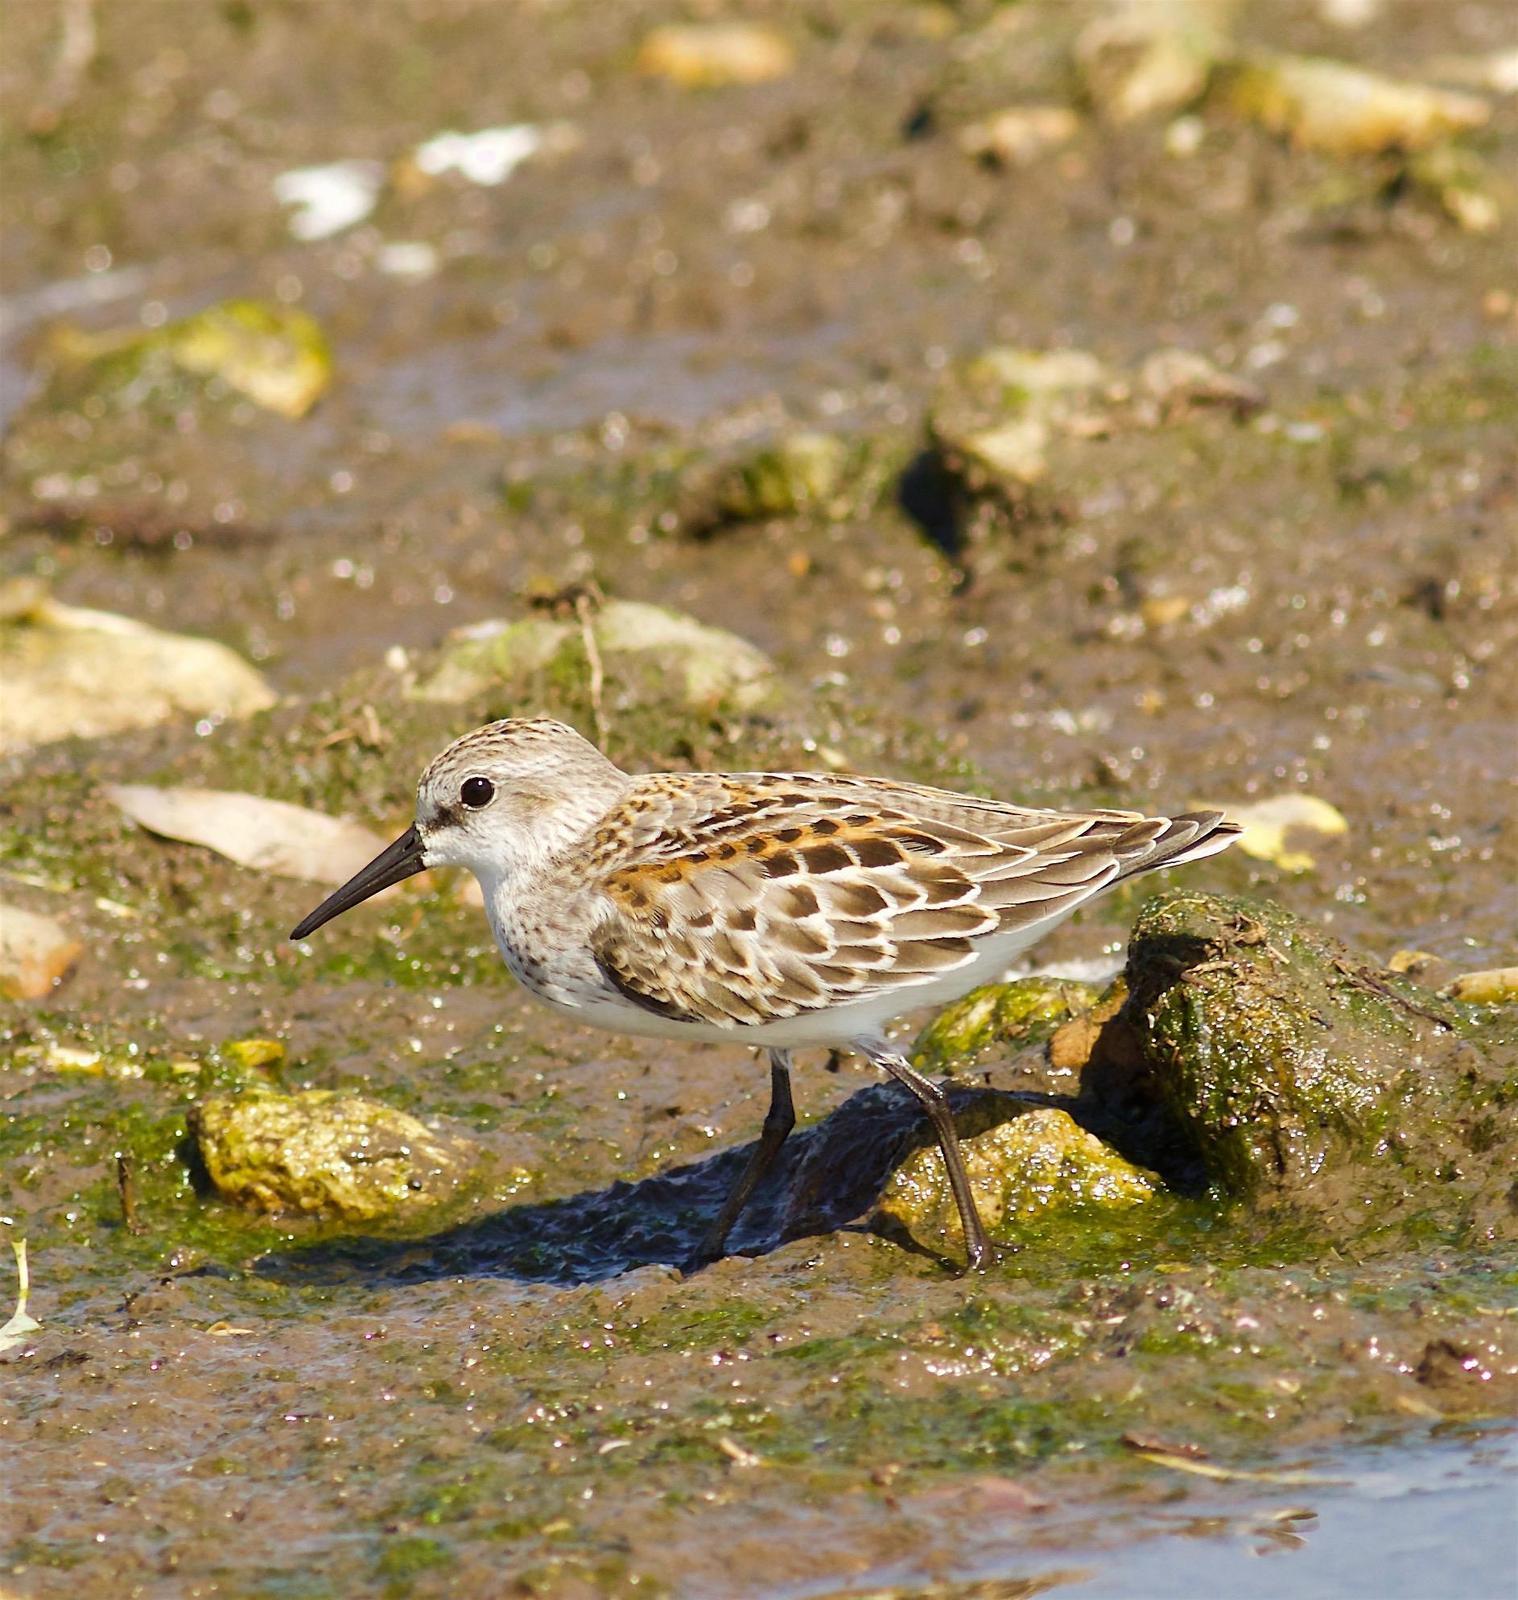 Western Sandpiper Photo by Kathryn Keith